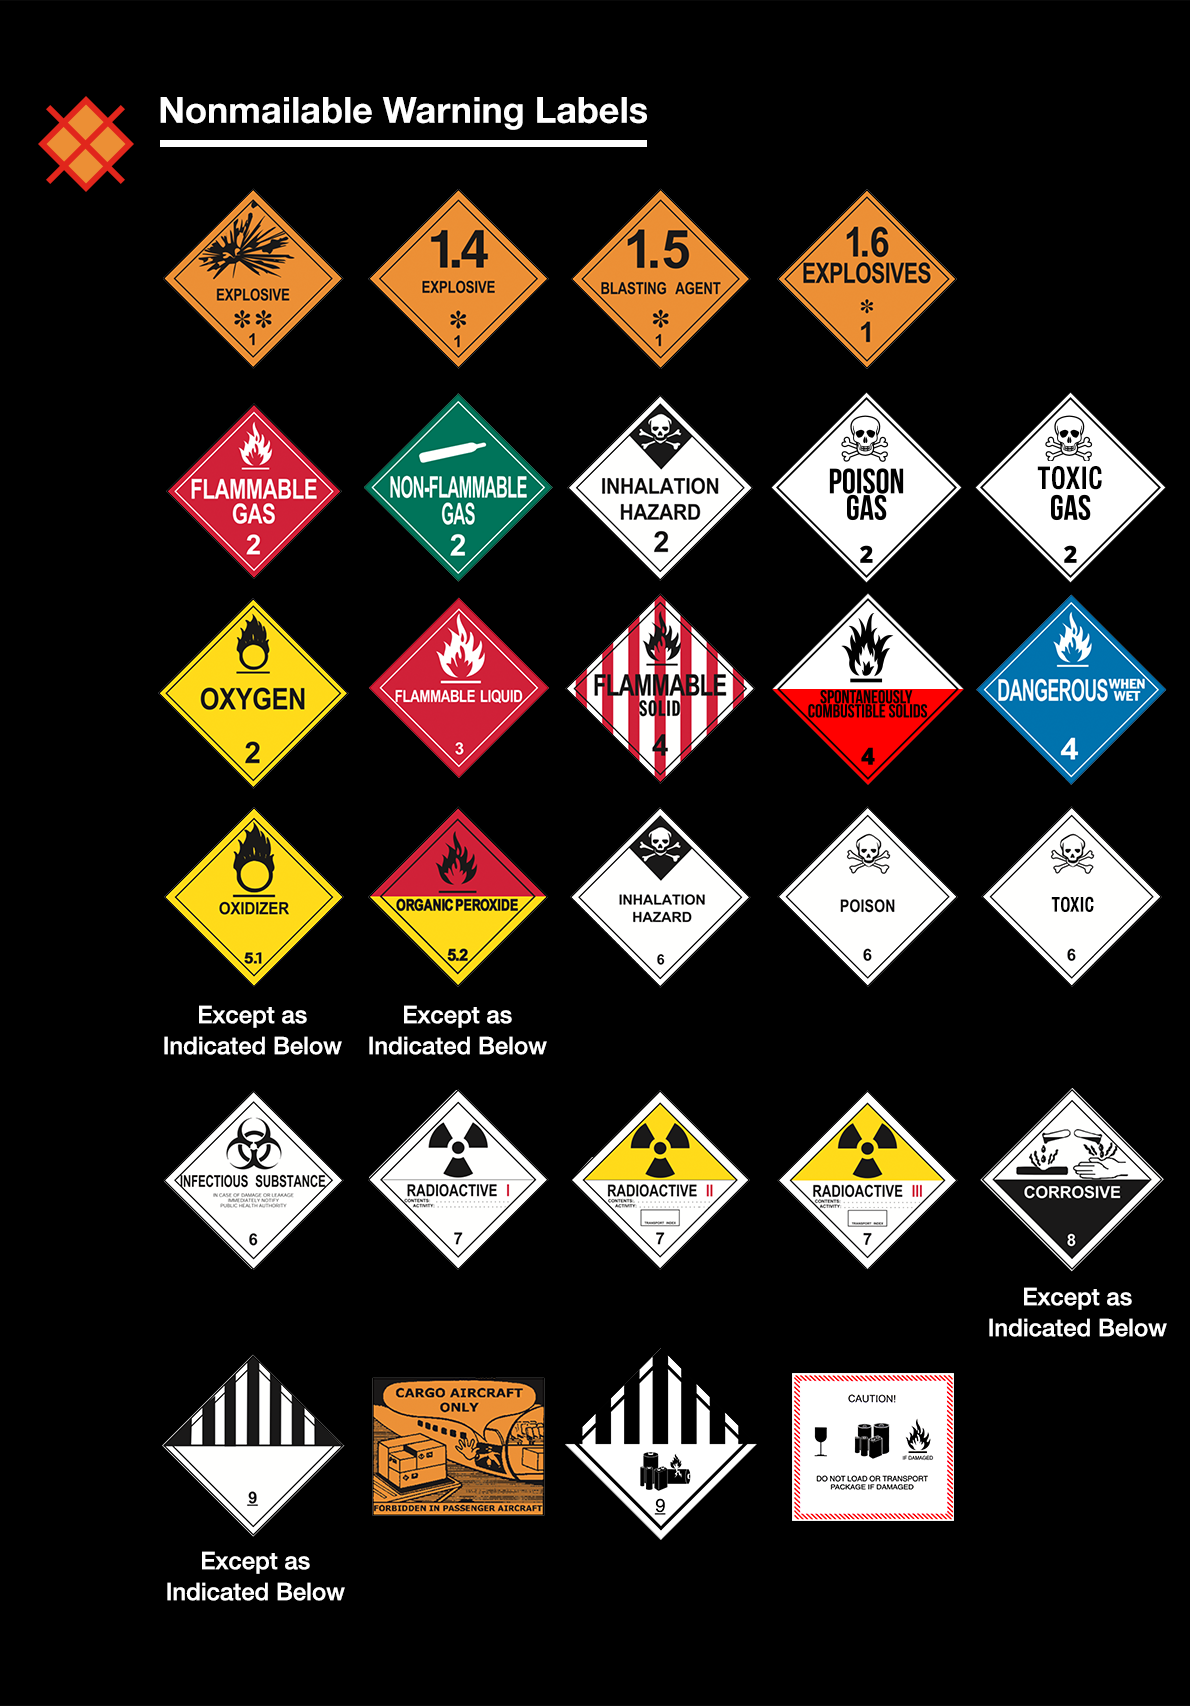 DOT hazardous materials warning labels. Labels prohibited in the mail: Basic placard for explosive materials, Division 1.4 explosive, Division 1.5 blasting agent, Division 1.6 explosives, Division 2.1 flammable gas, Division 2.2 nonflammable gas, Division 2.3 inhalation hazard, Division 2.3 poisonous gas, Division 2.3 toxic gas, Class 2 oxygen, Class 3 flammable liquid, Division 4.1 flammable solid, Division 4.2 spontaneously combustible solid, Division 4.3 dangerous when wet, Division 5.1 oxidizer, Division 5.2 organic peroxide, Division 6.1 inhalation hazard, Division 6.1 poison, Division 6.1 toxic, Division 6.1 infectious substance, Division 7.1 radioactive white 1, Division 7.2 radioactive yellow 2, Division 7.3 radioactive yellow 3, Class 8 corrosive, Class 9 miscellaneous hazardous materials, cargo aircraft only, and Class 9 lithium battery, and lithium ion battery and/or lithium metal battery “do not load or transport package if damaged.”